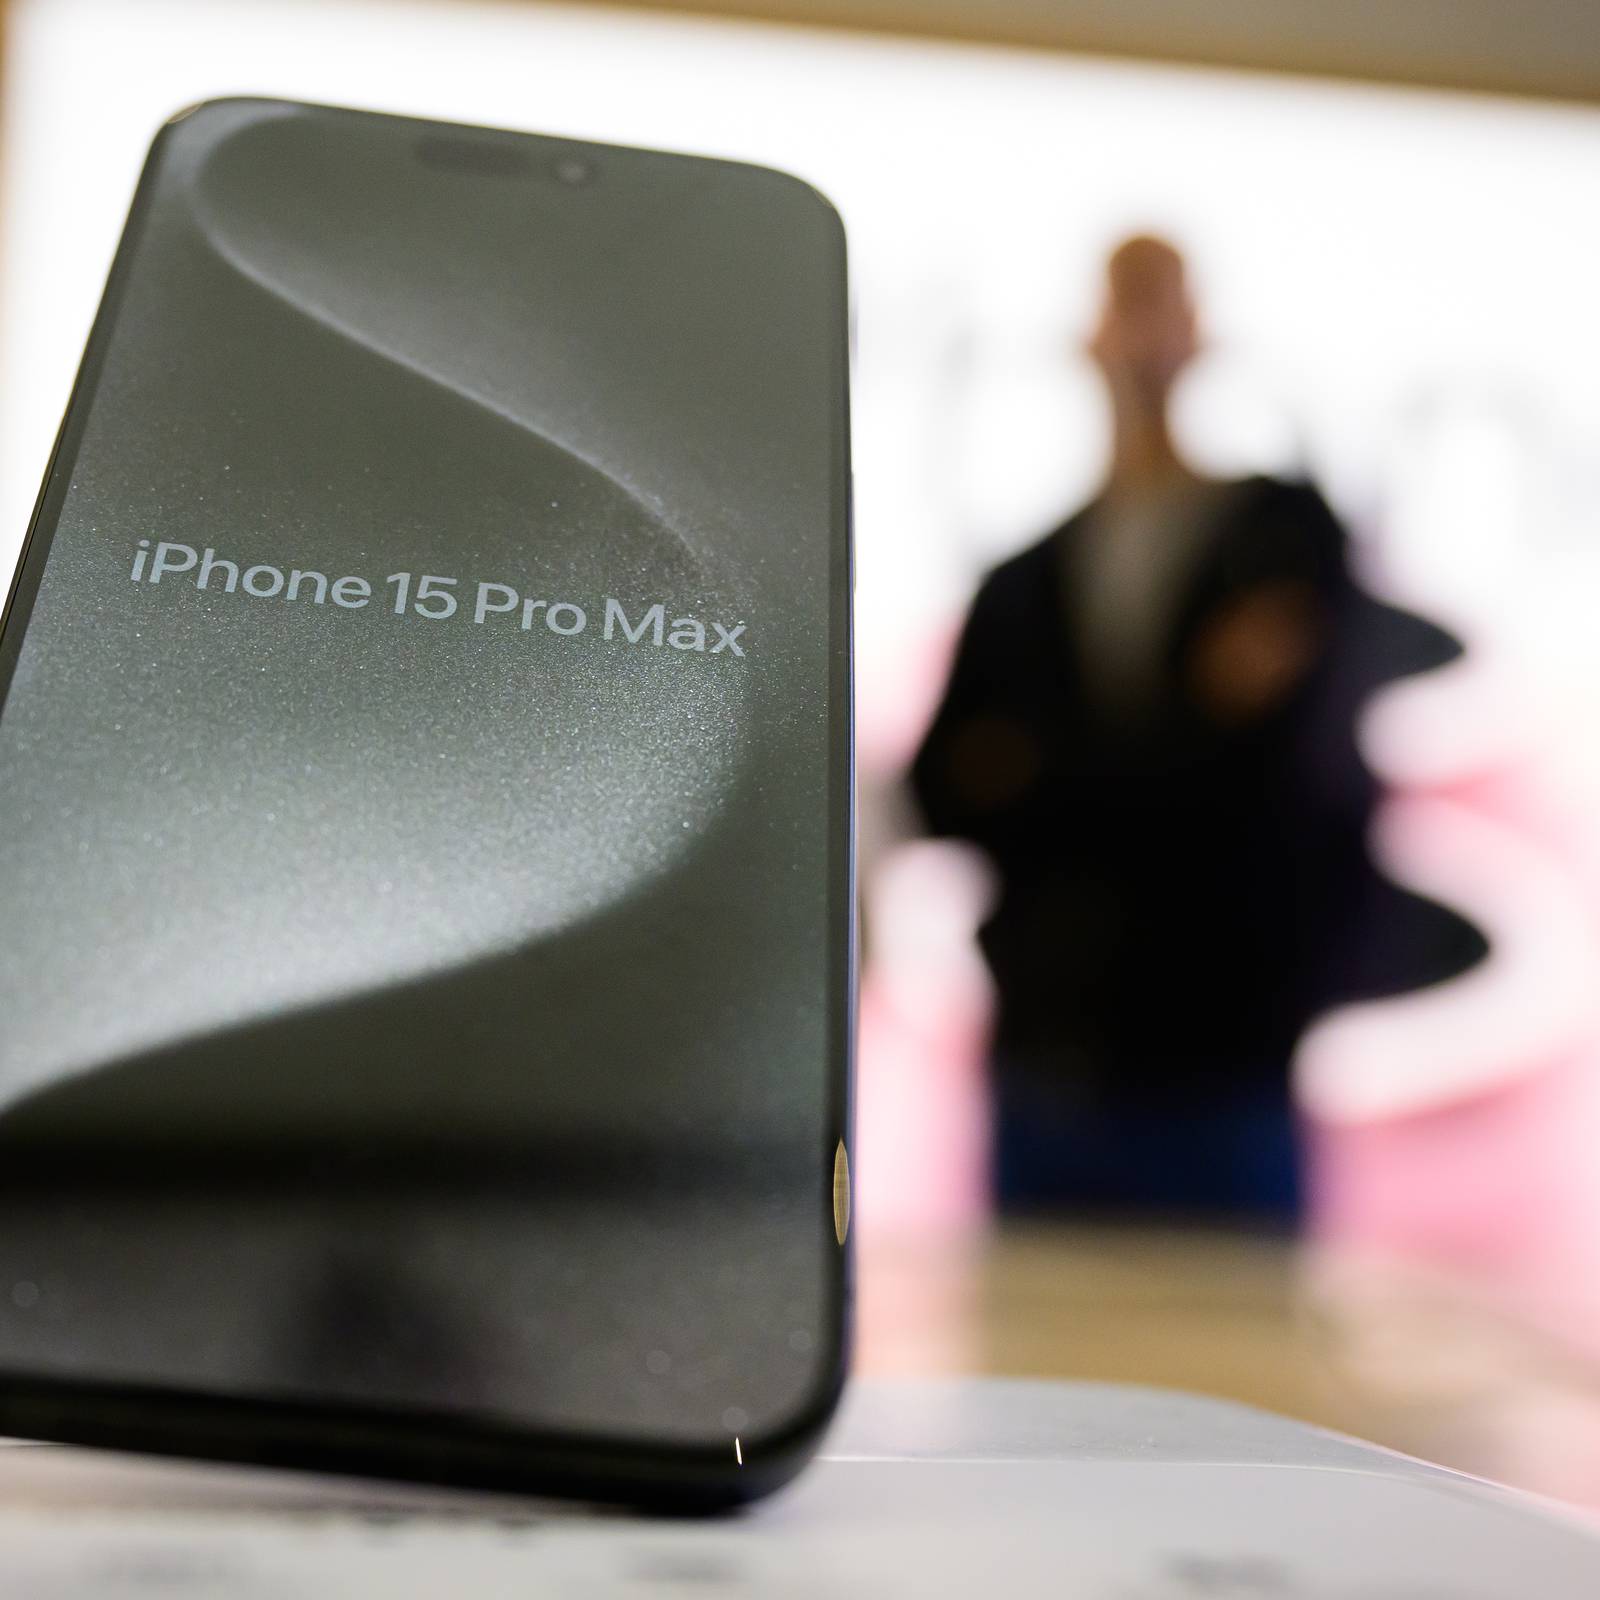 iPhone 15: users of Pro and Pro Max models complain of overheating issues, iPhone